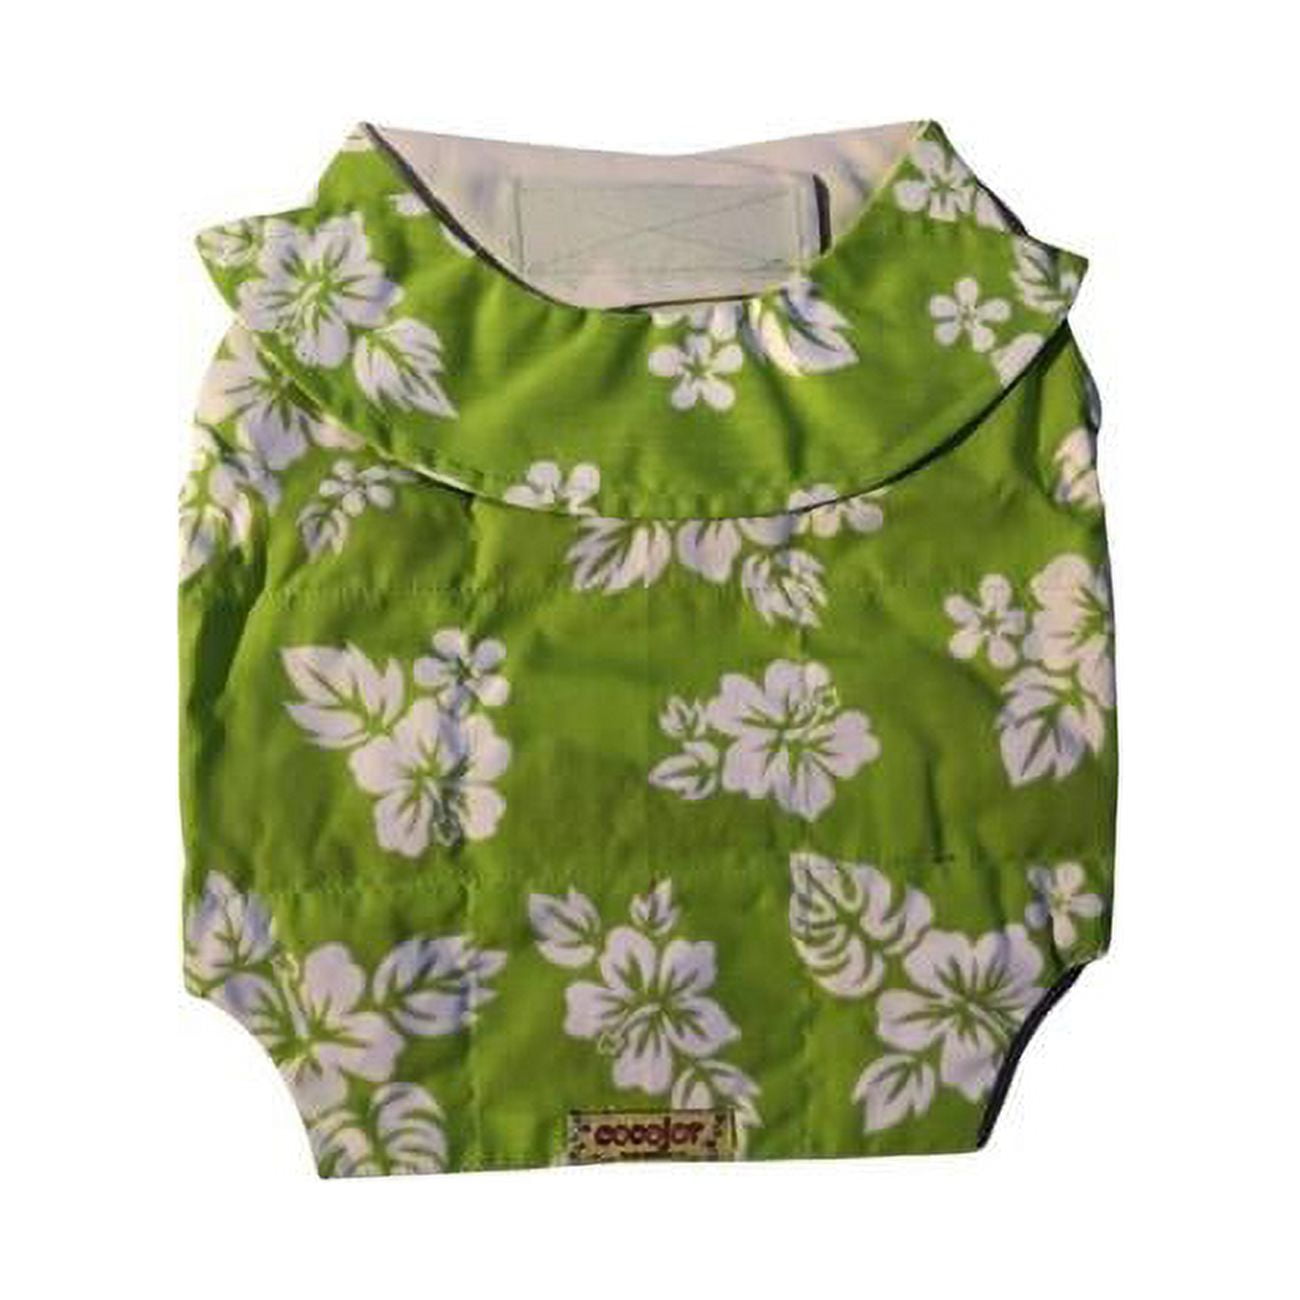 Picture of Cocojor GRN12C359 Hawaii 5-0 Cooling Vest for Dog, Green - 2XL